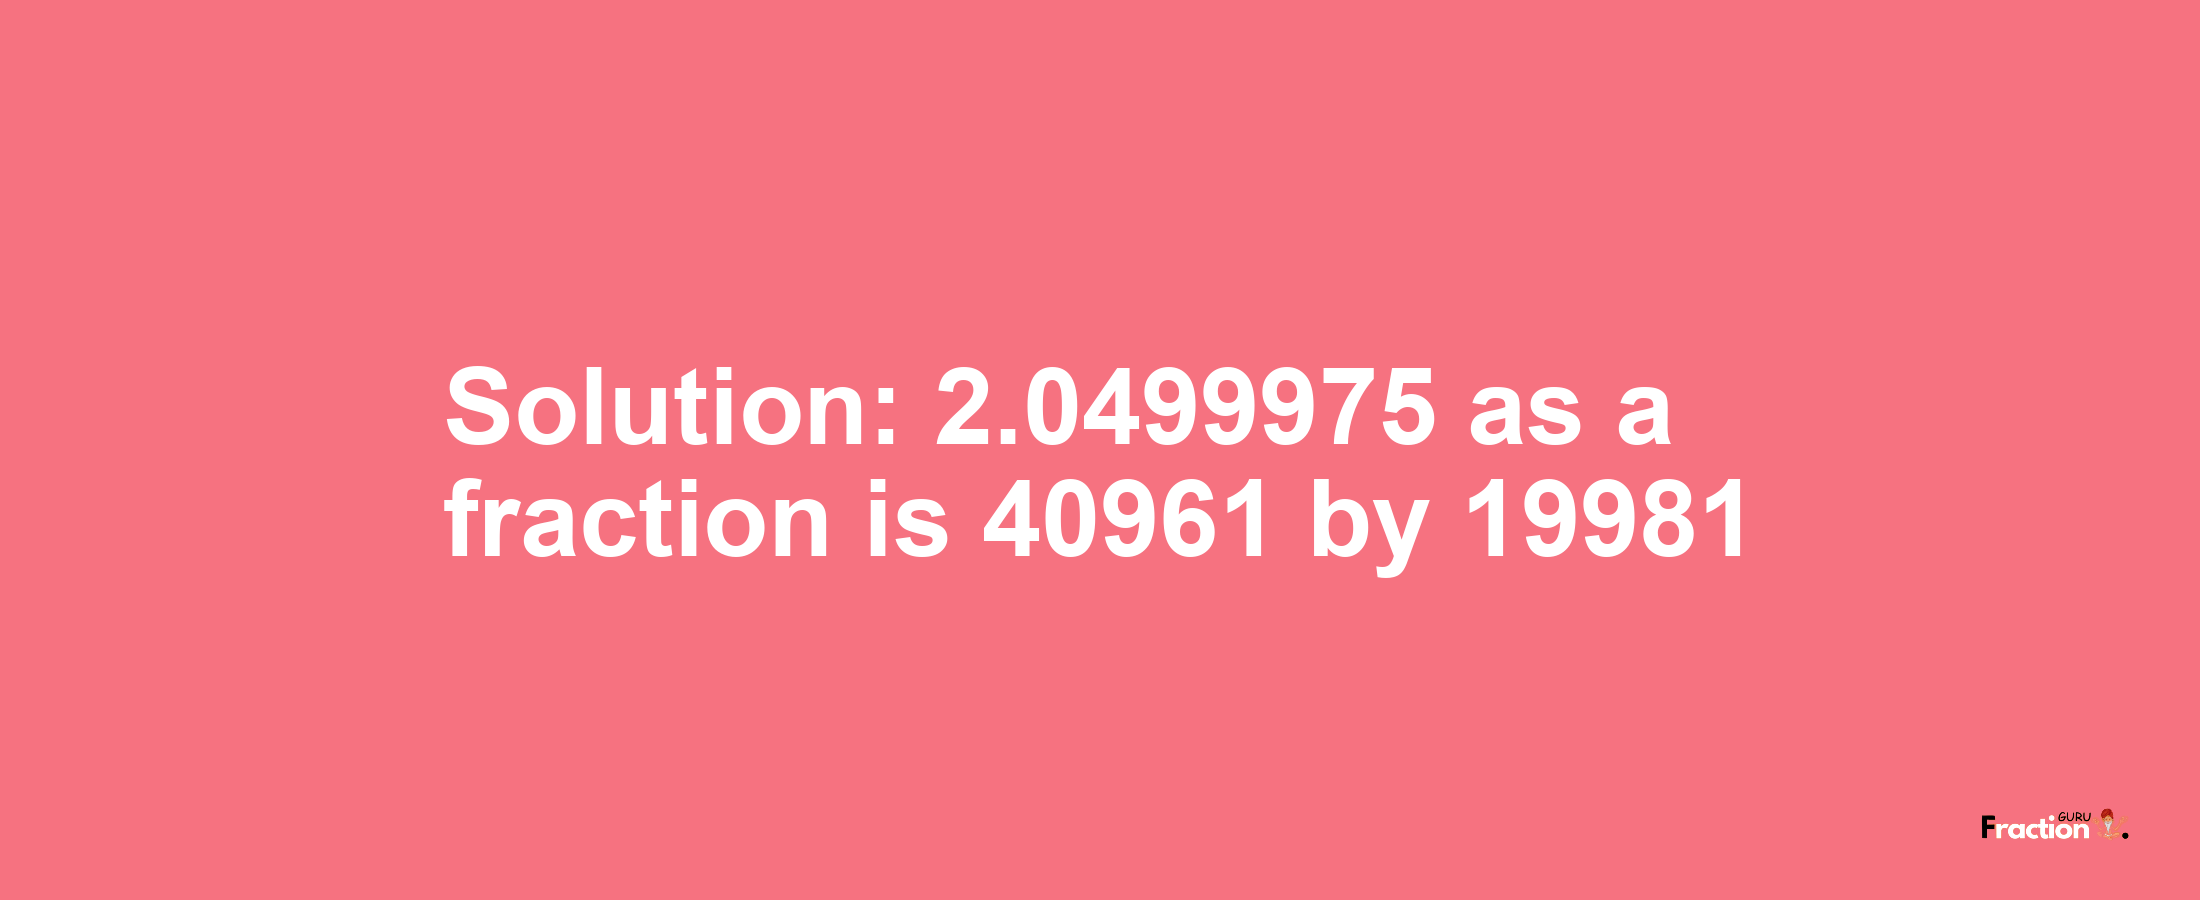 Solution:2.0499975 as a fraction is 40961/19981